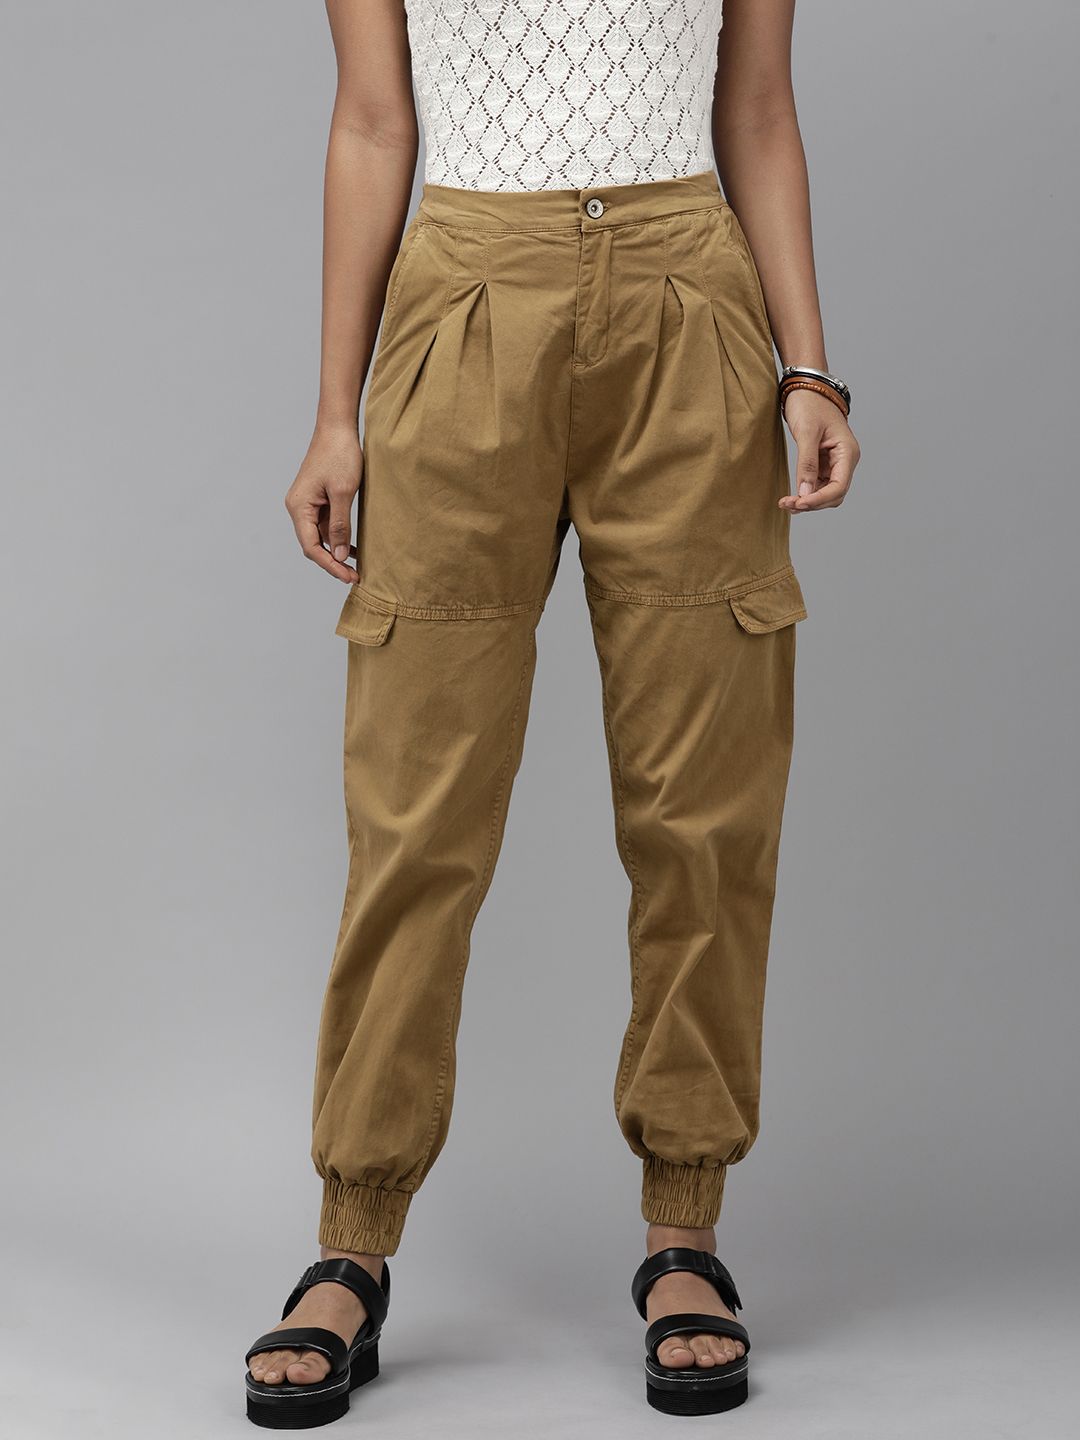 The Roadster Lifestyle Co Women Mustard Yellow Regular Fit Joggers Trousers Price in India